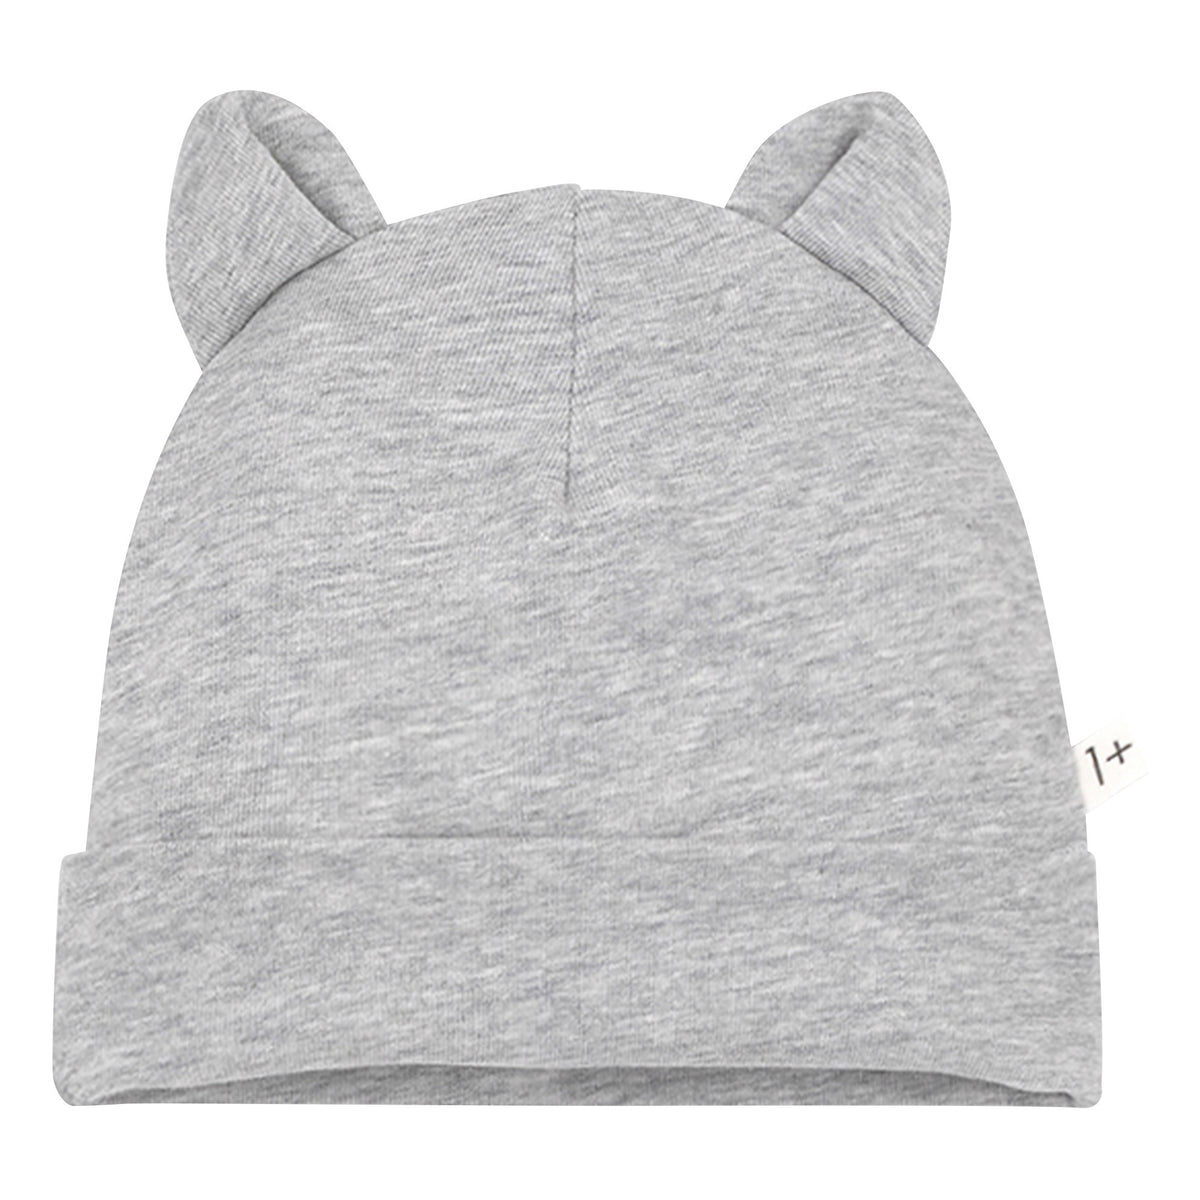 grey beanie for baby with ears on top